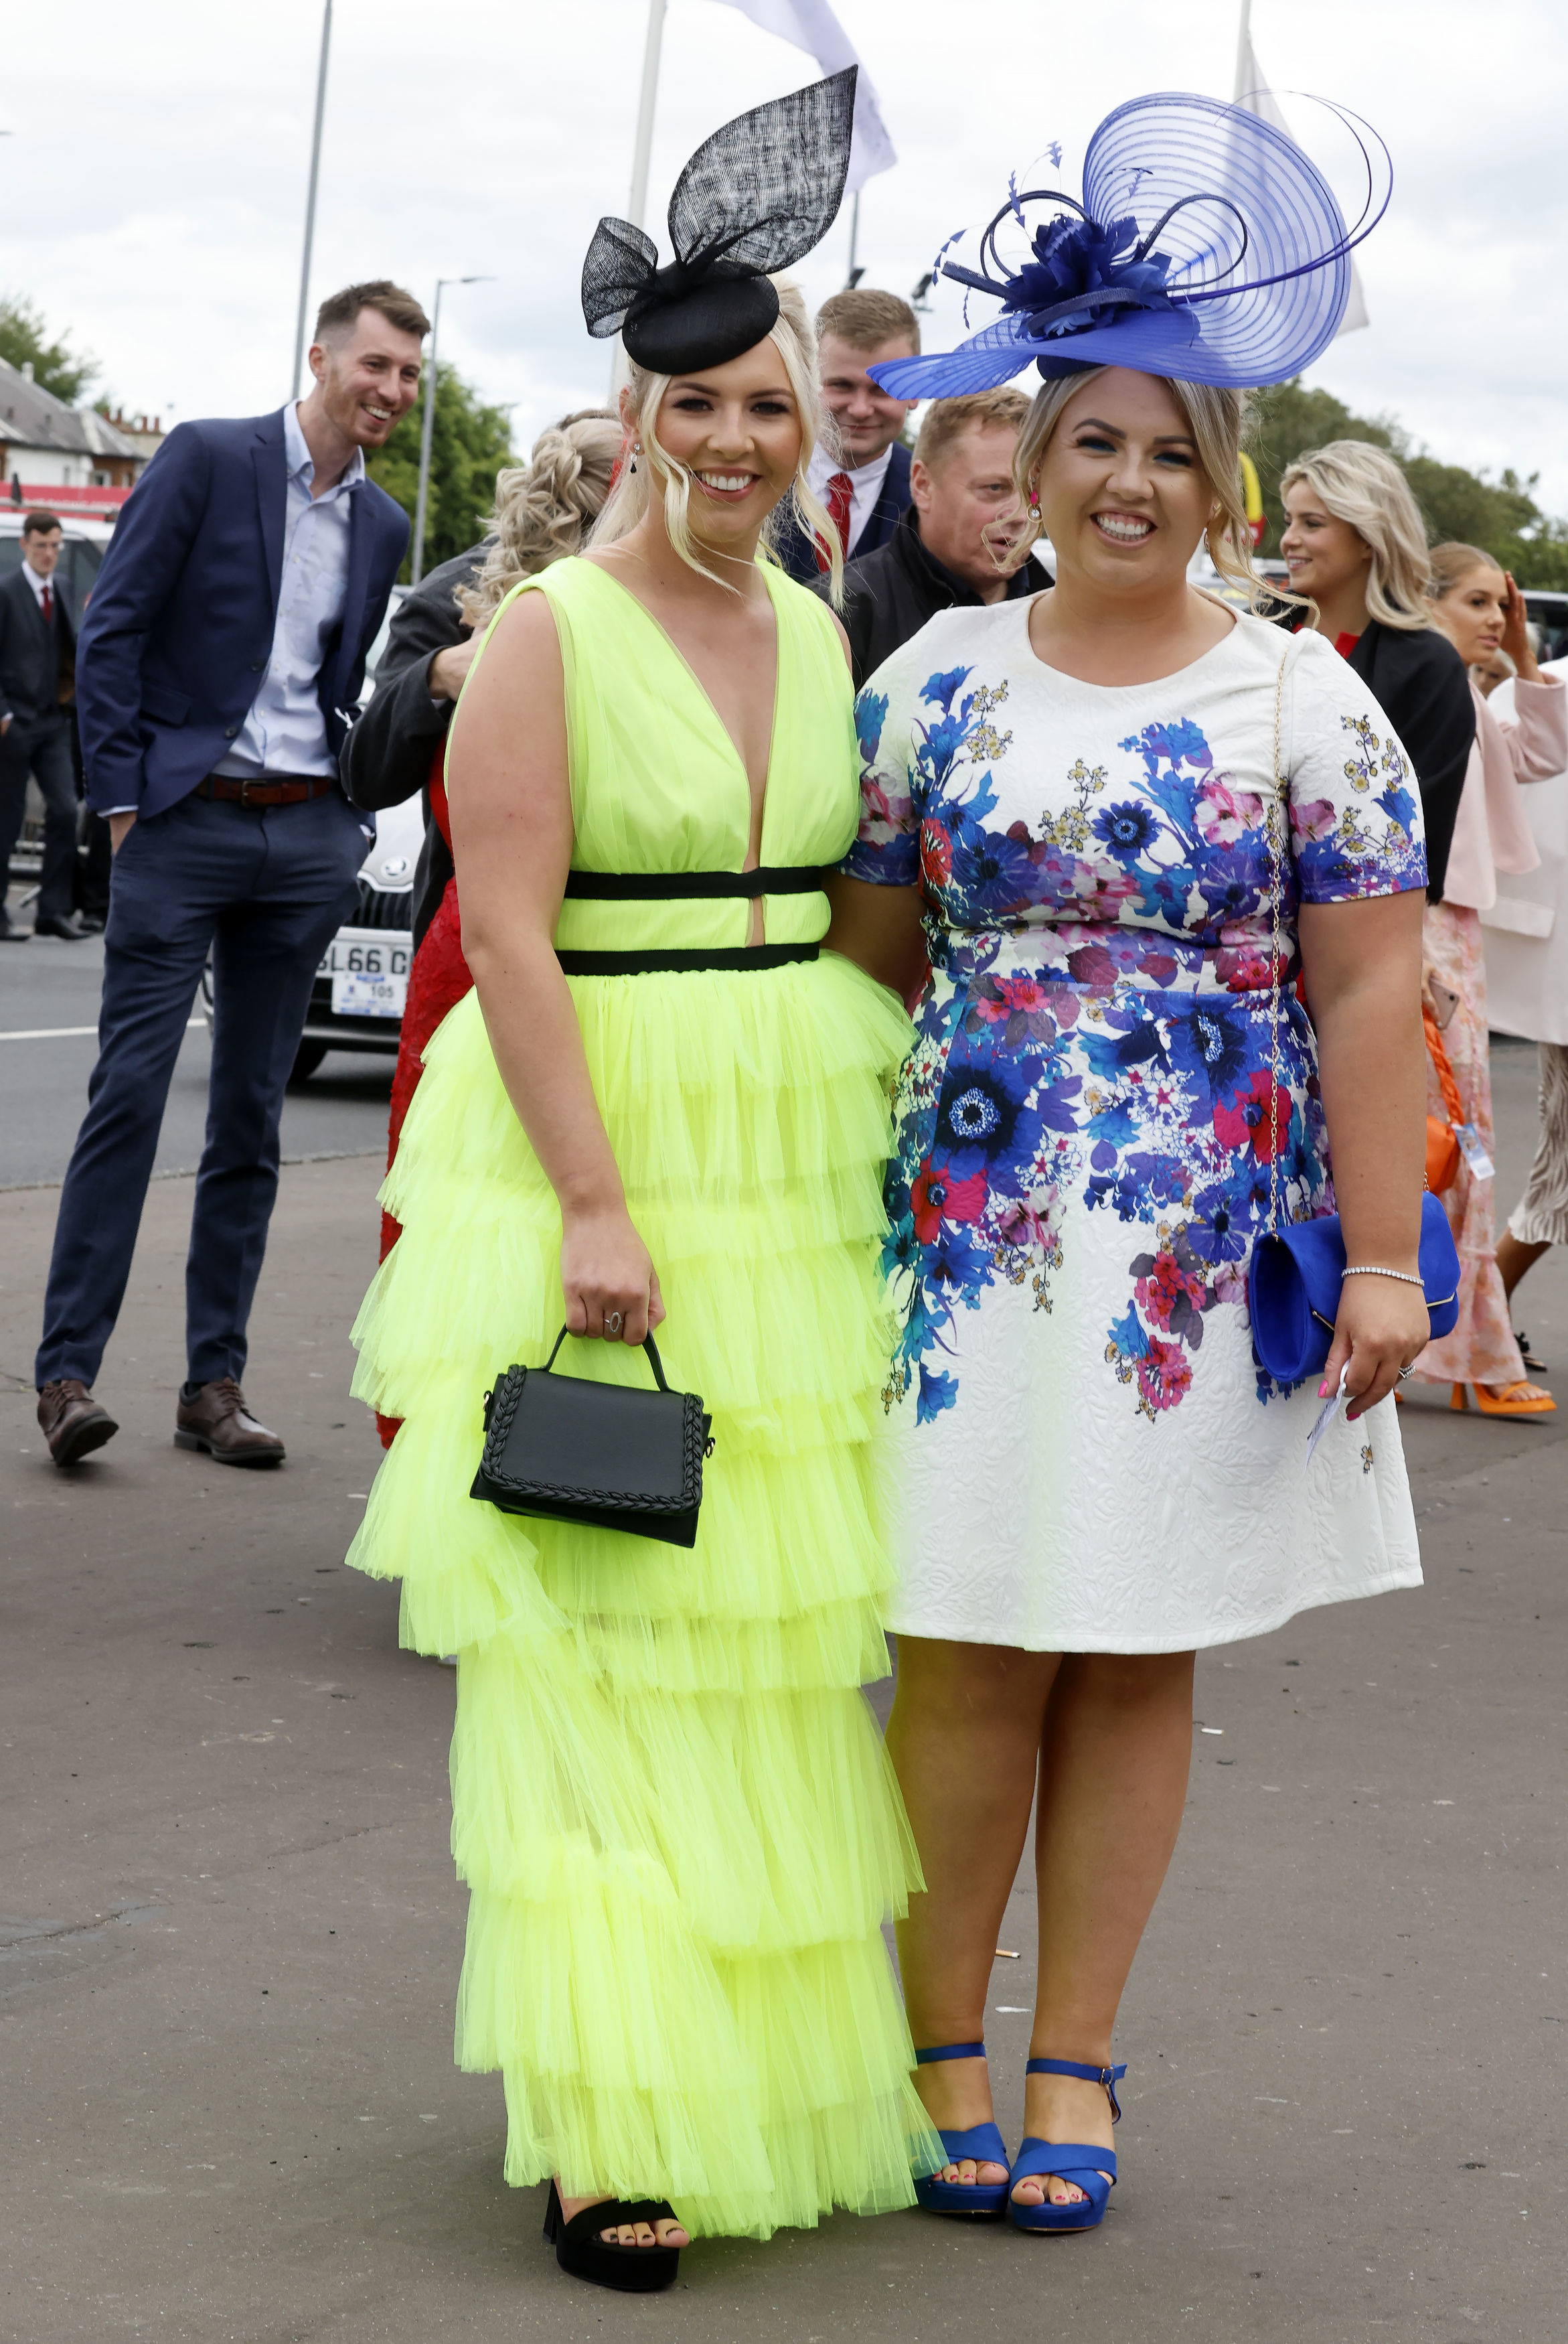 , Glam racegoers flood into Ayr racecourse as punters make most of sunny weather with daring outfits